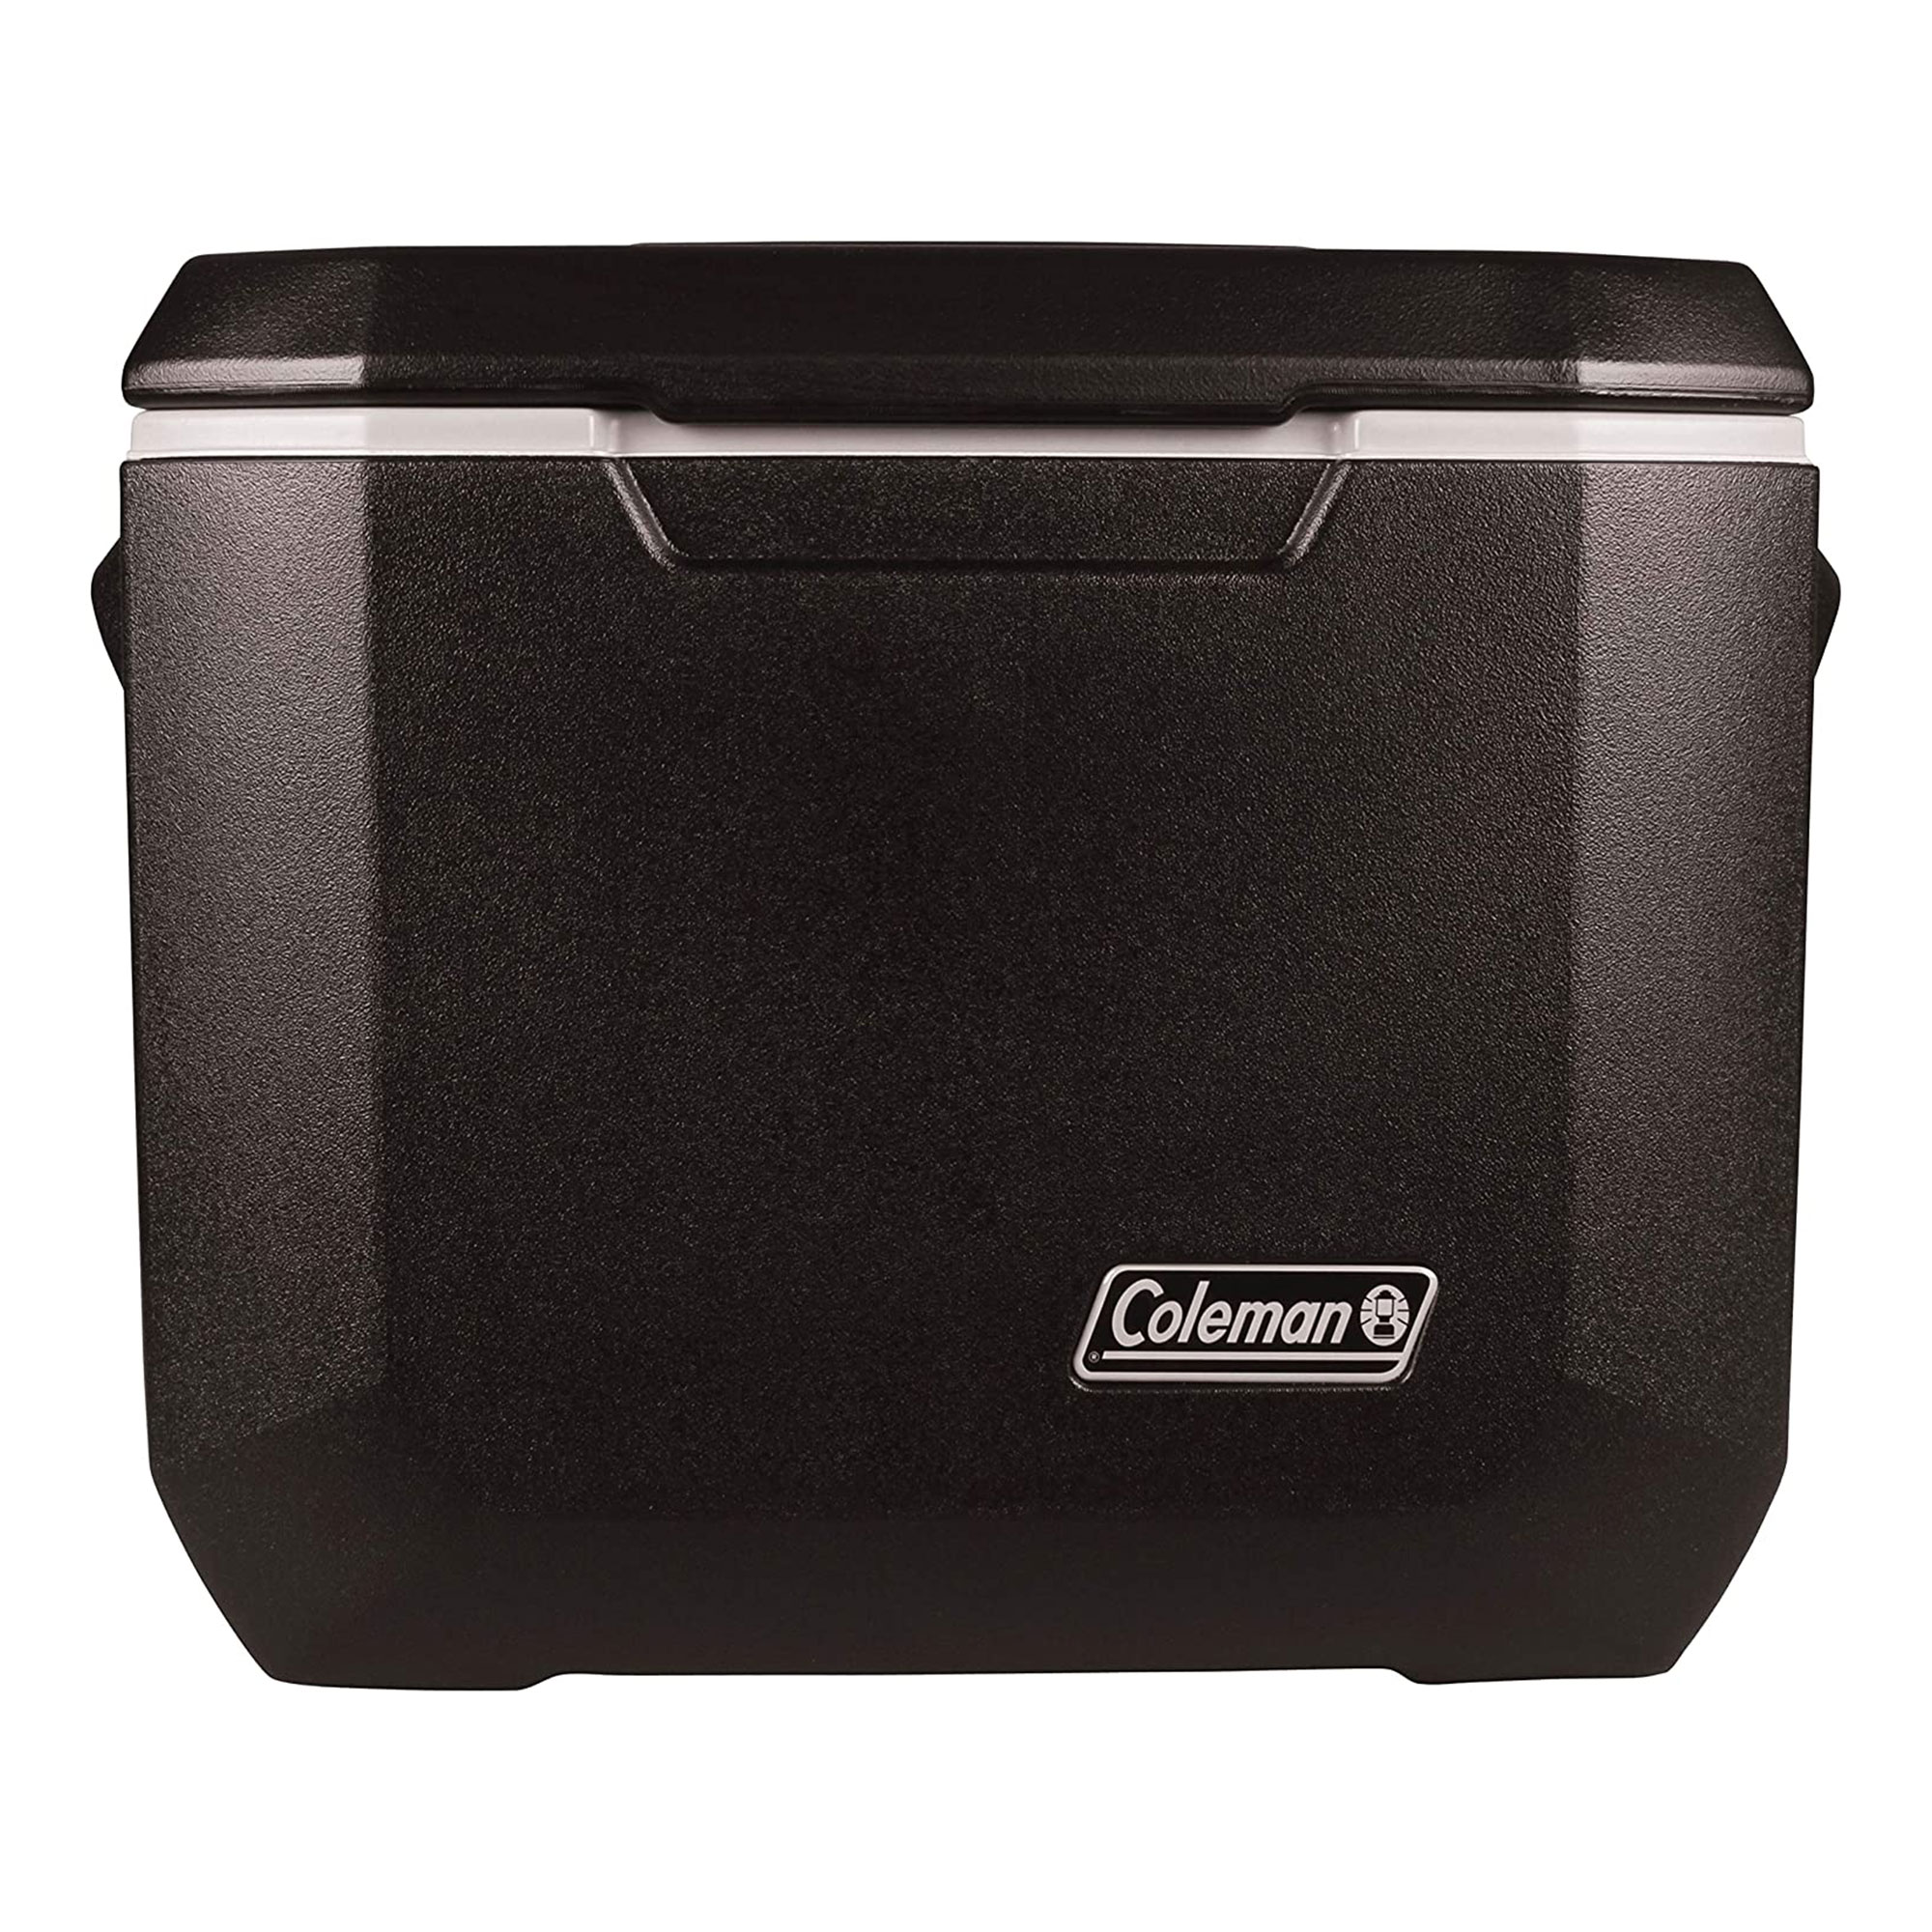 Coleman Xtreme 50 Quart 5-Day Hard Cooler with Wheels and Have-A-Seat Lid - image 2 of 9